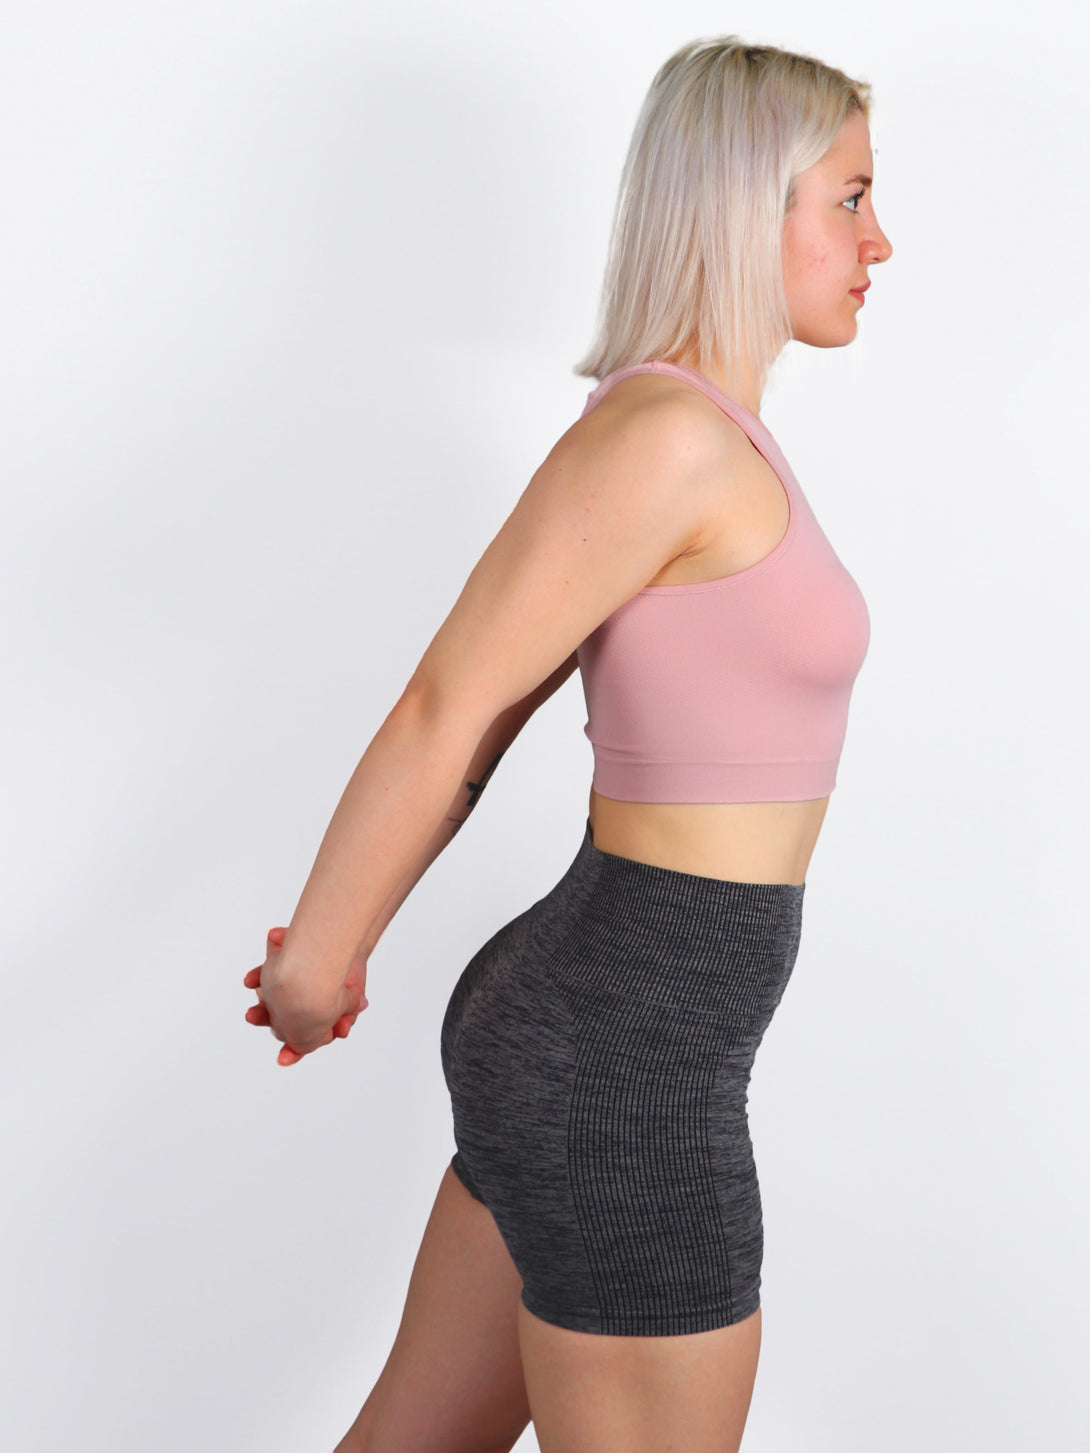 A Woman Wearing Pale Mauve Color All-Day Seamless Sleeveless Crop Top